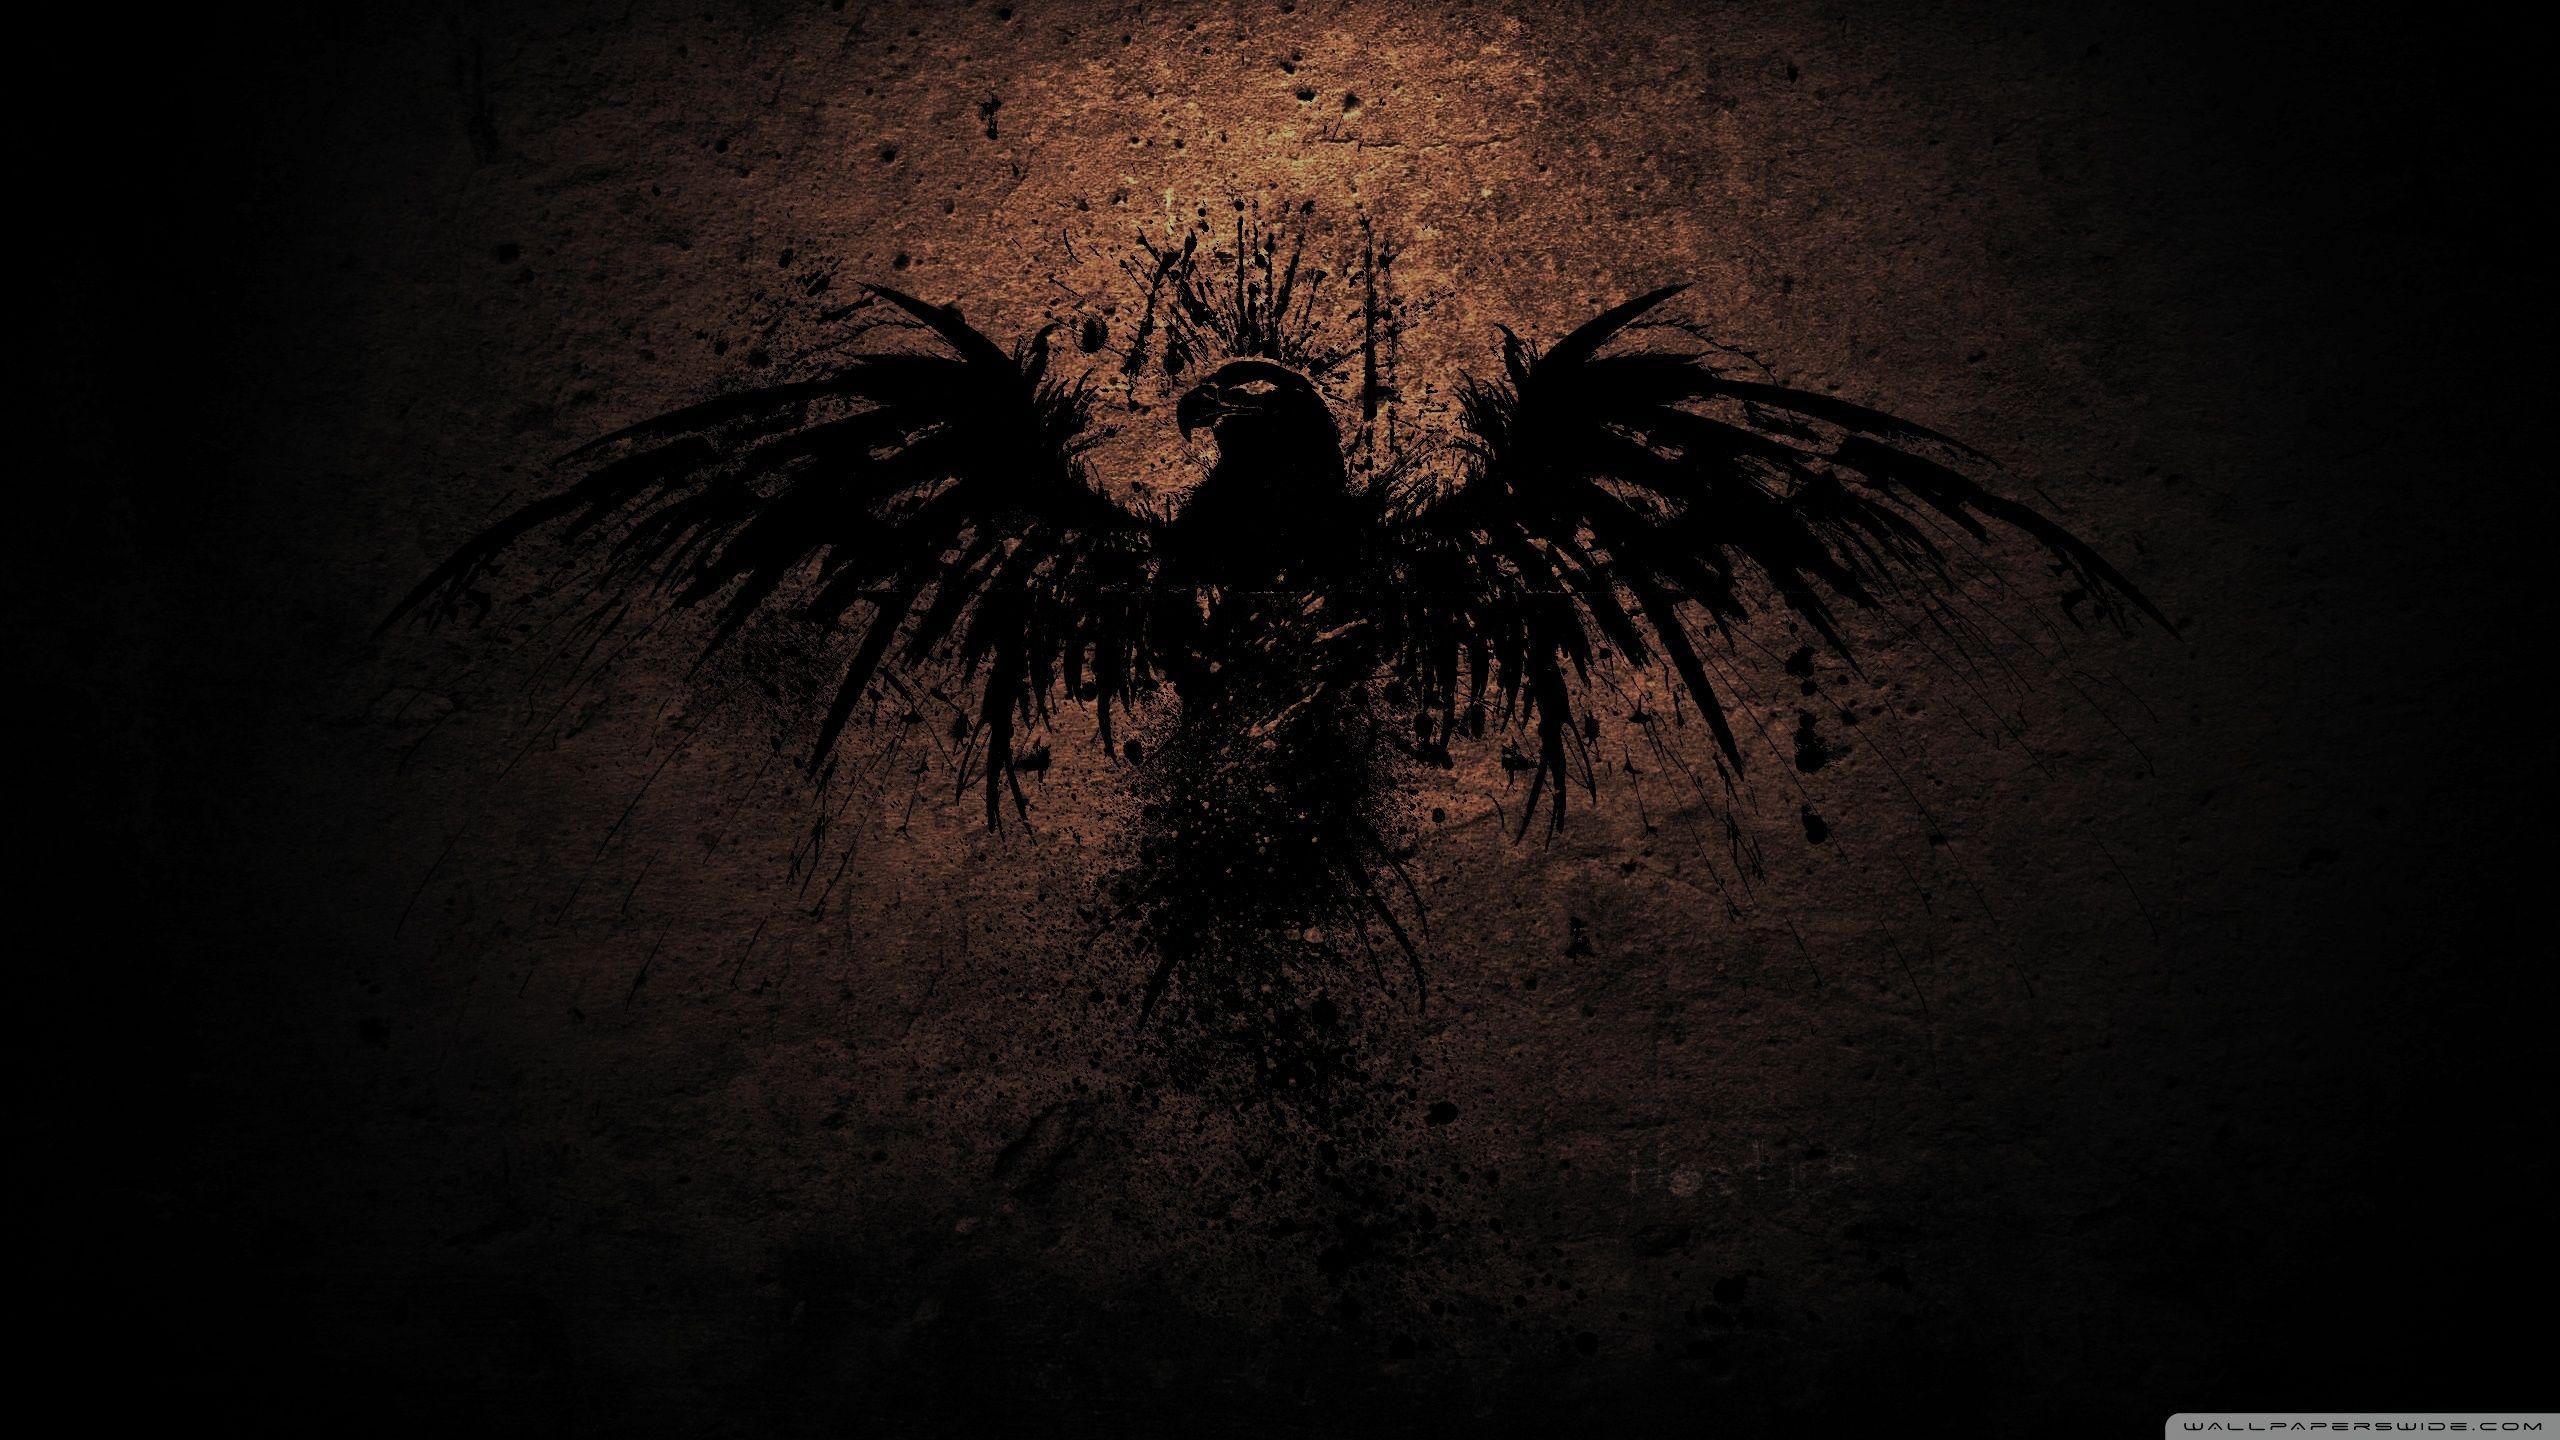 Dark Eagle Wallpapers - Top Free Dark Eagle Backgrounds - WallpaperAccess